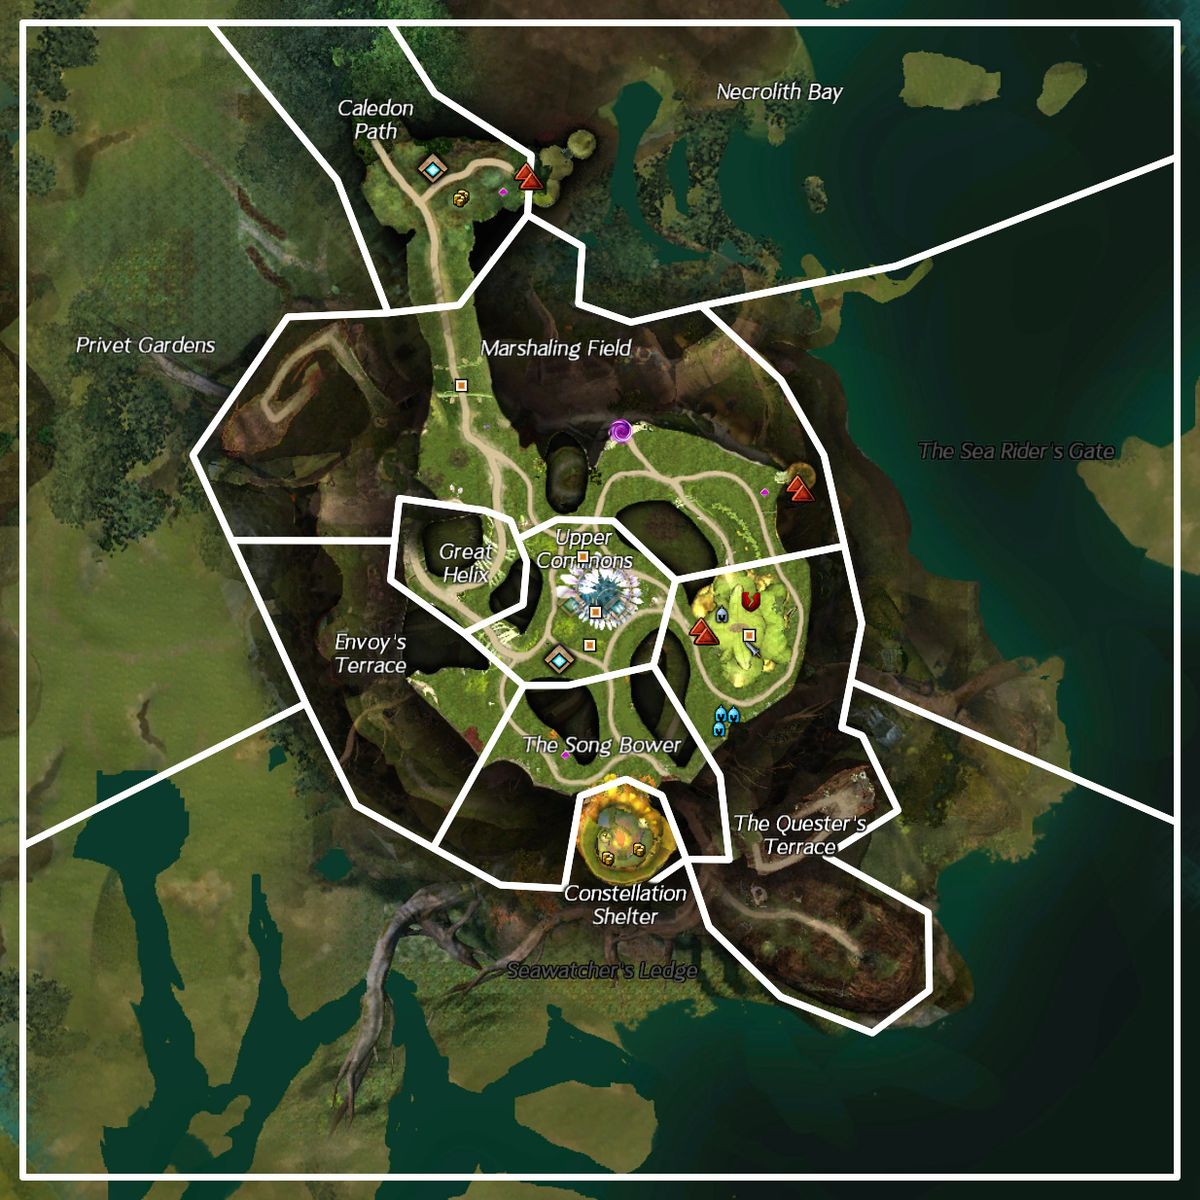 https://wiki.guildwars2.com/images/thumb/4/4e/The_Grove_map.jpg/1200px-The_Grove_map.jpg